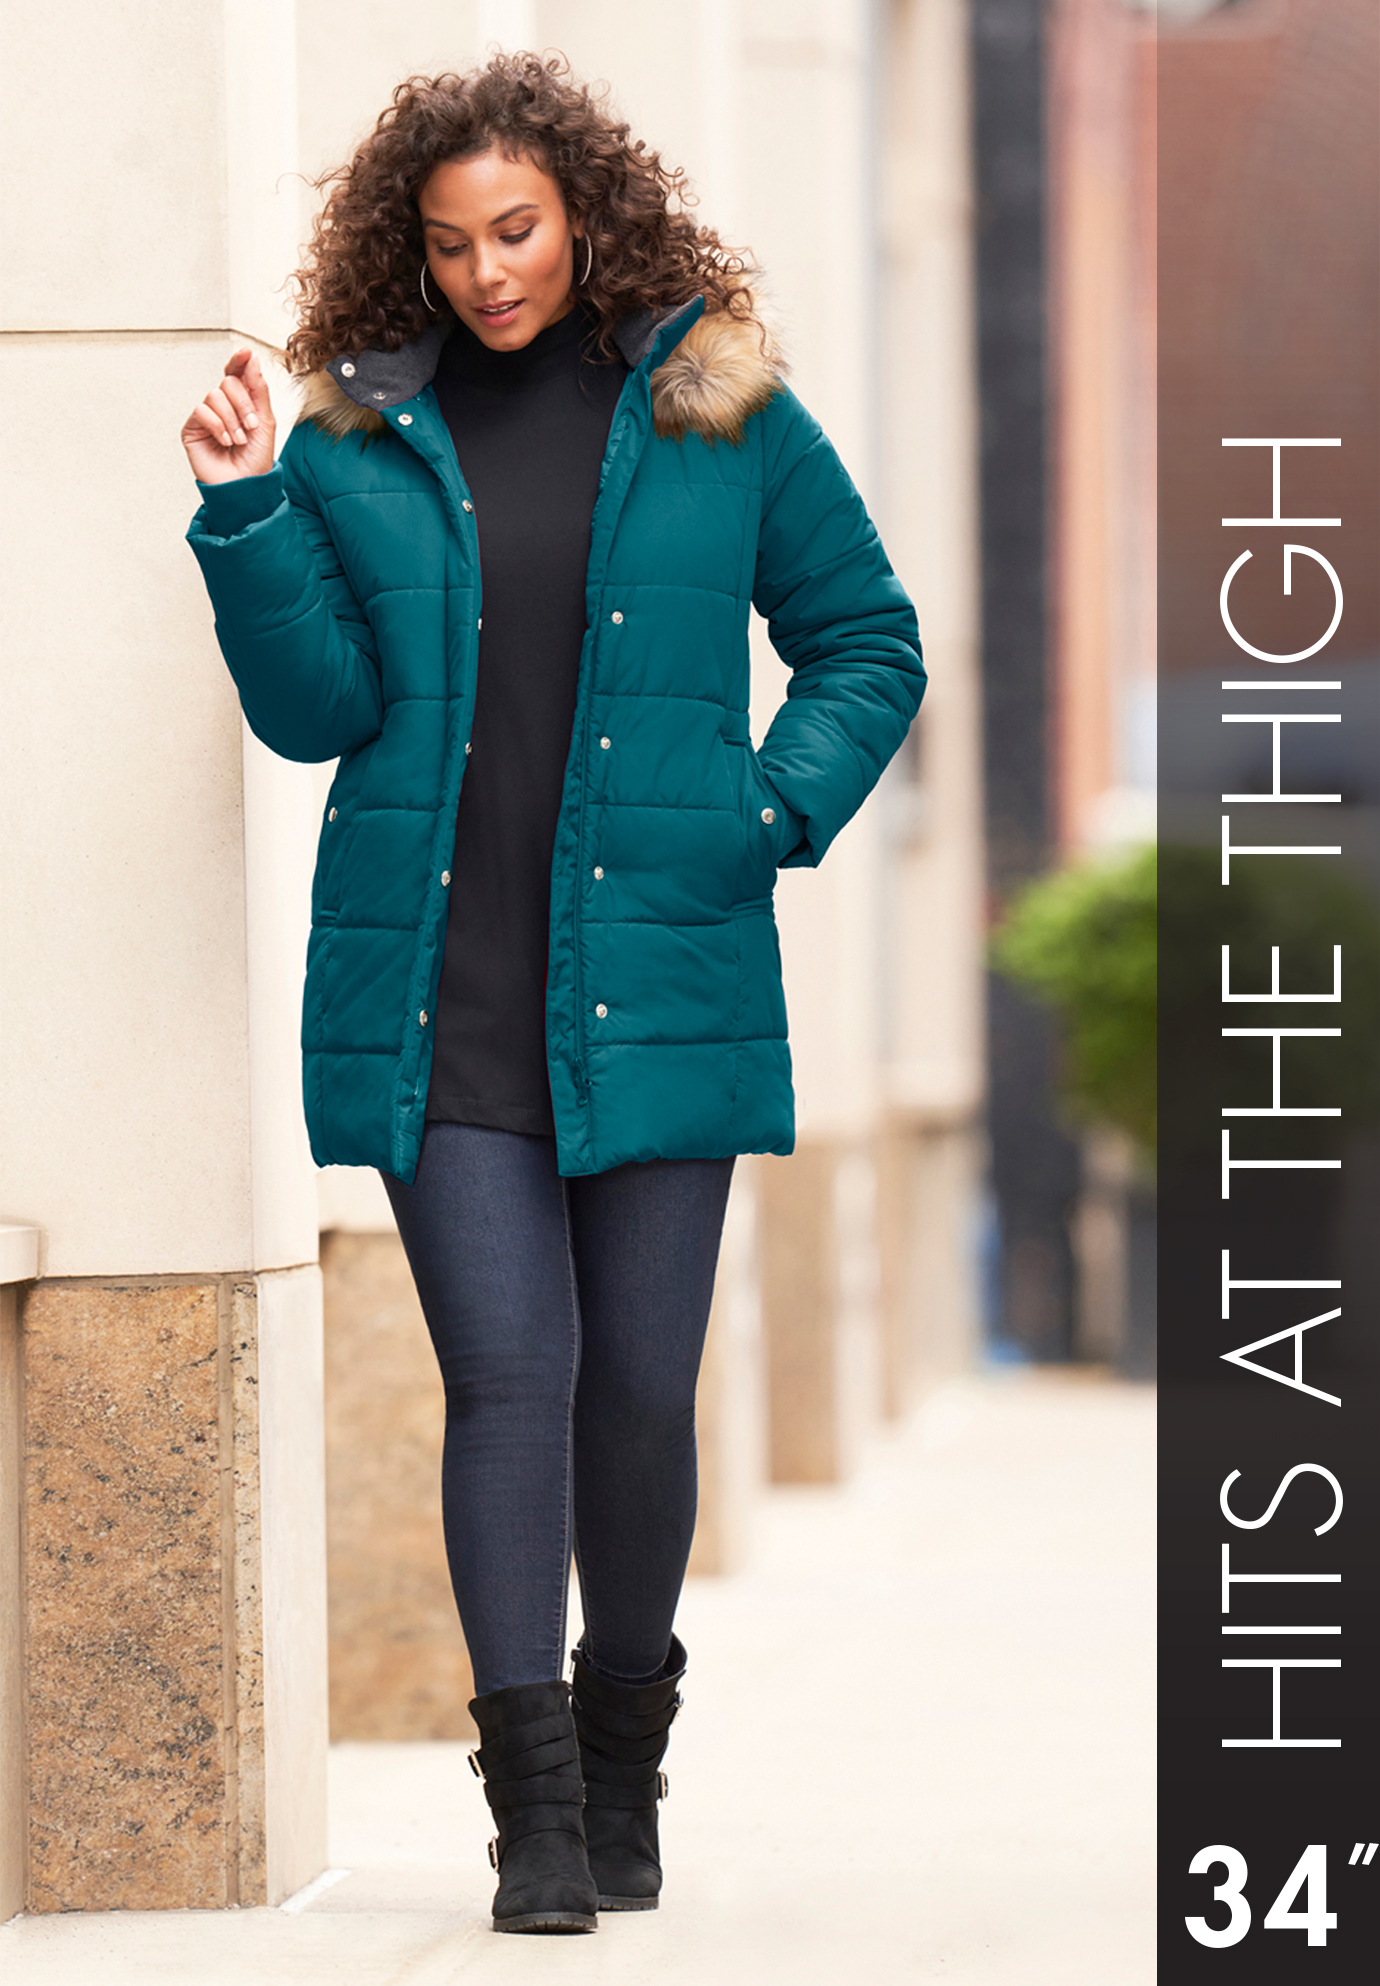 Roaman's Women's Plus Size Classic-Length Quilted Puffer Jacket Winter Coat - image 5 of 6